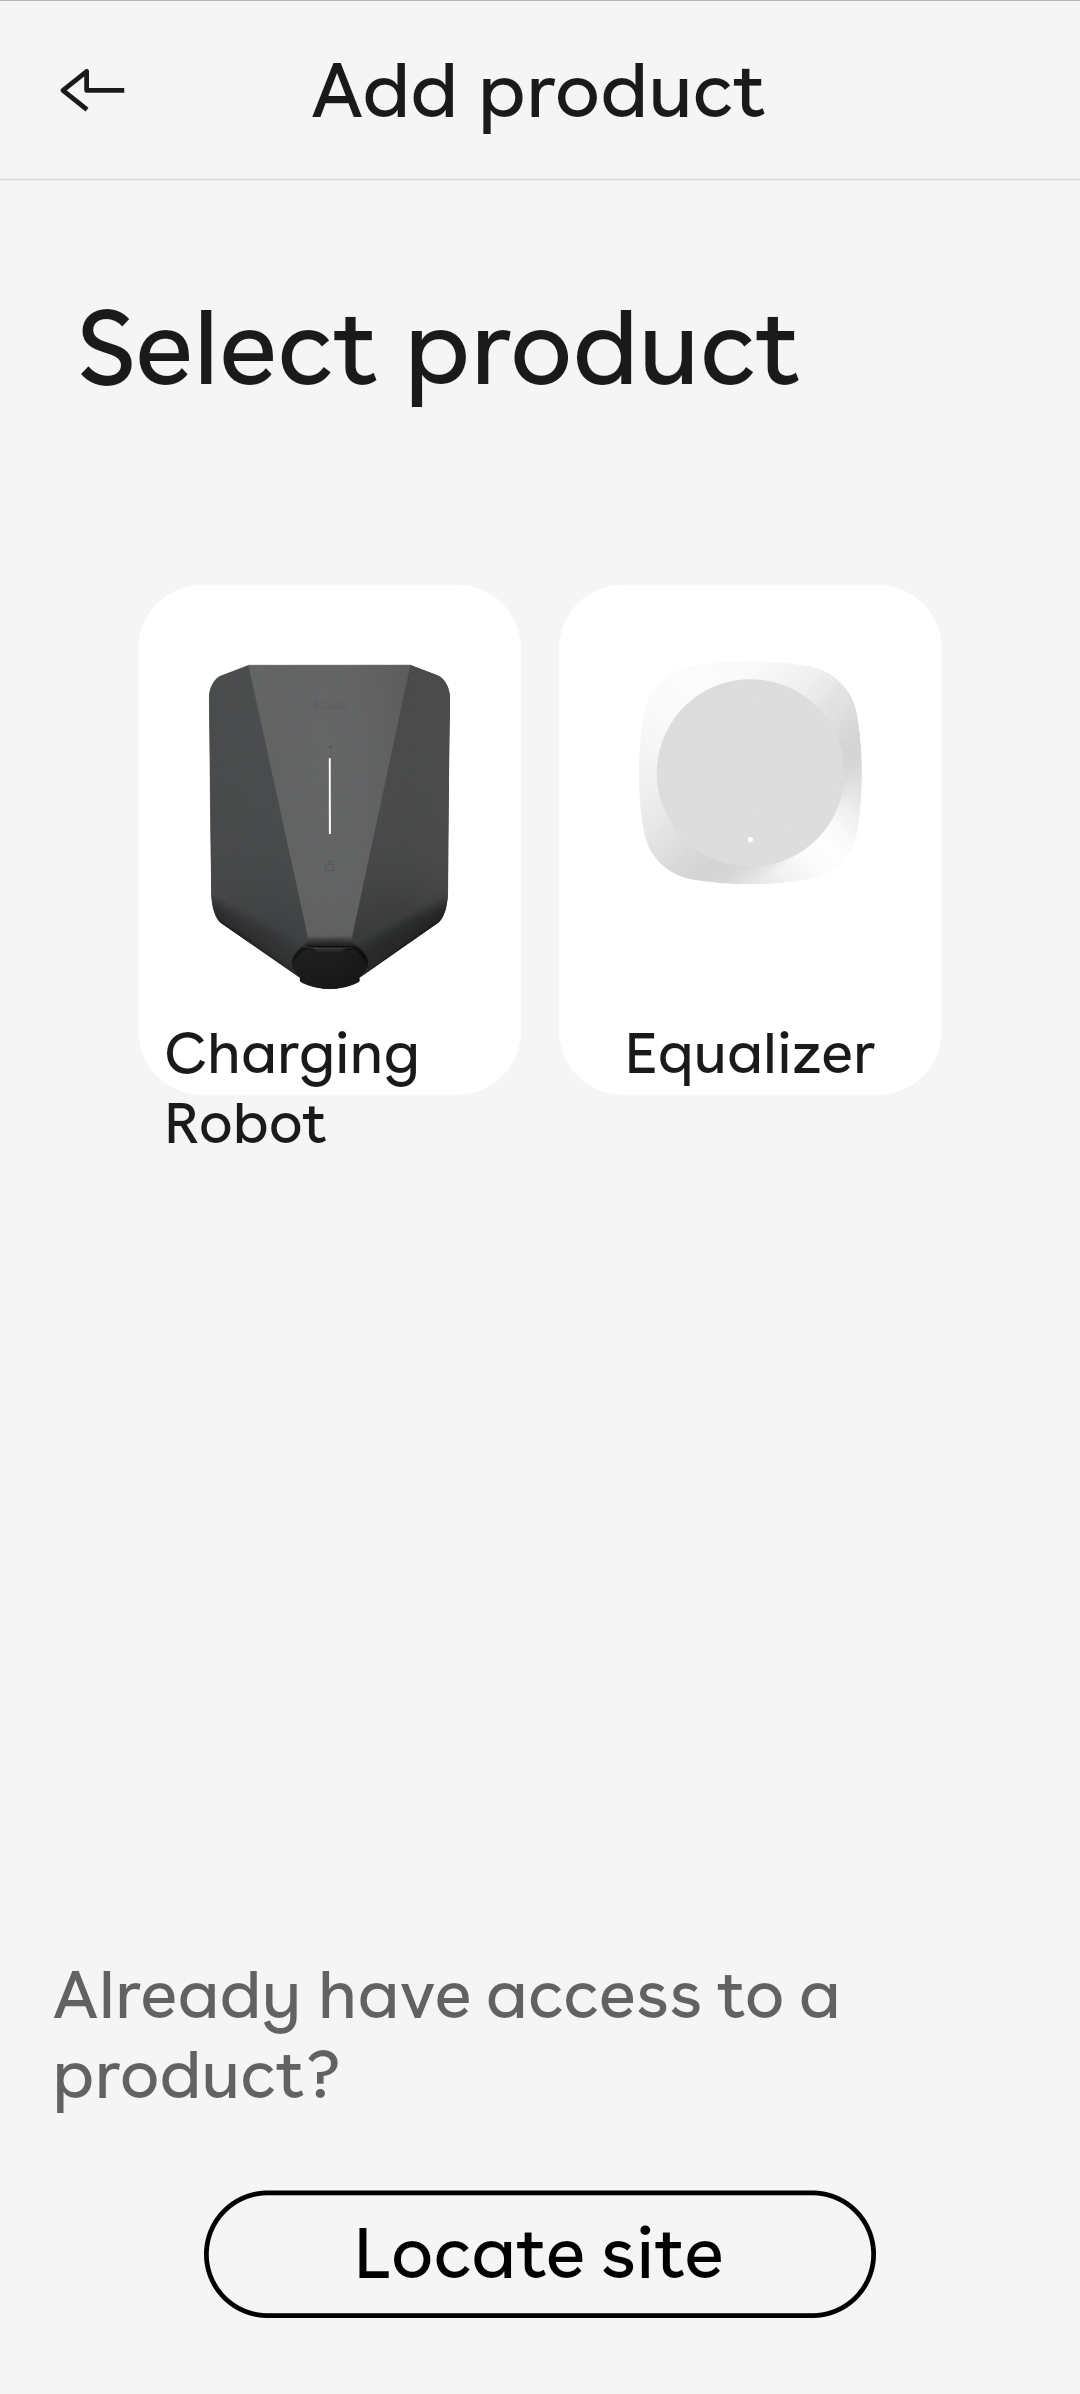 The Add product card, showing the Charging robot on the left, and an Equalizer on the right.